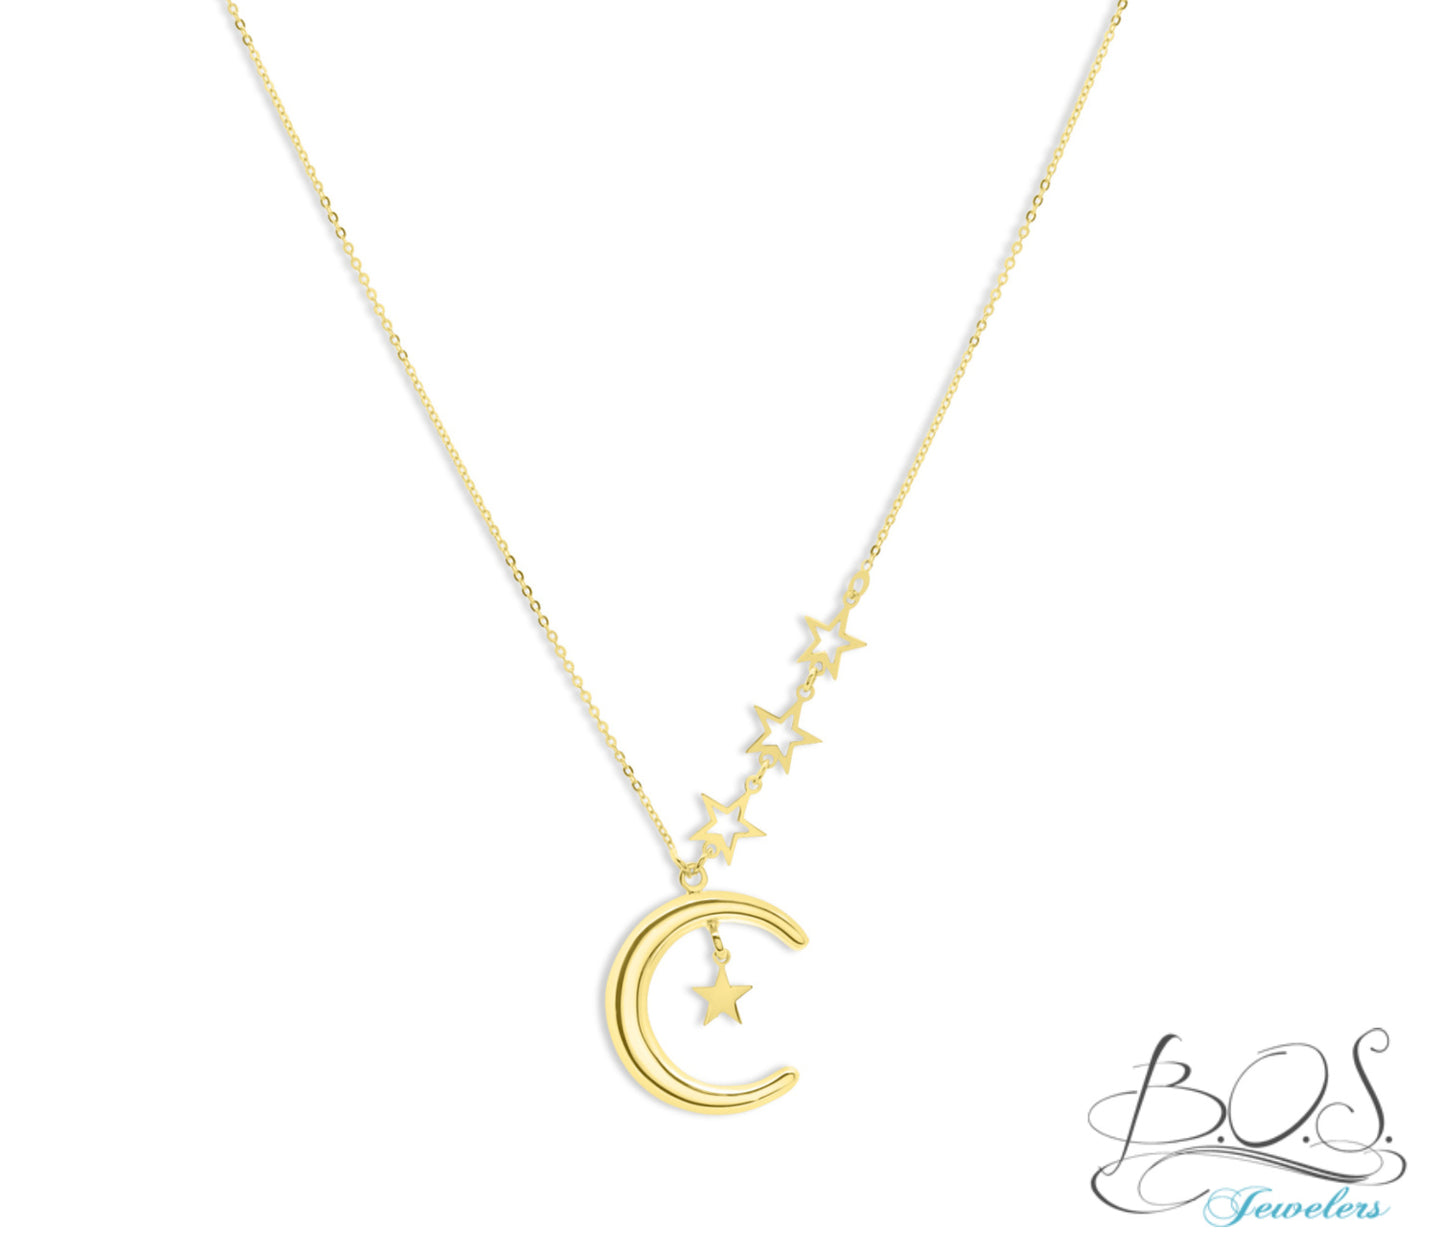 Crescent Moon Pendant with Star Accents Necklace 14KY Gold